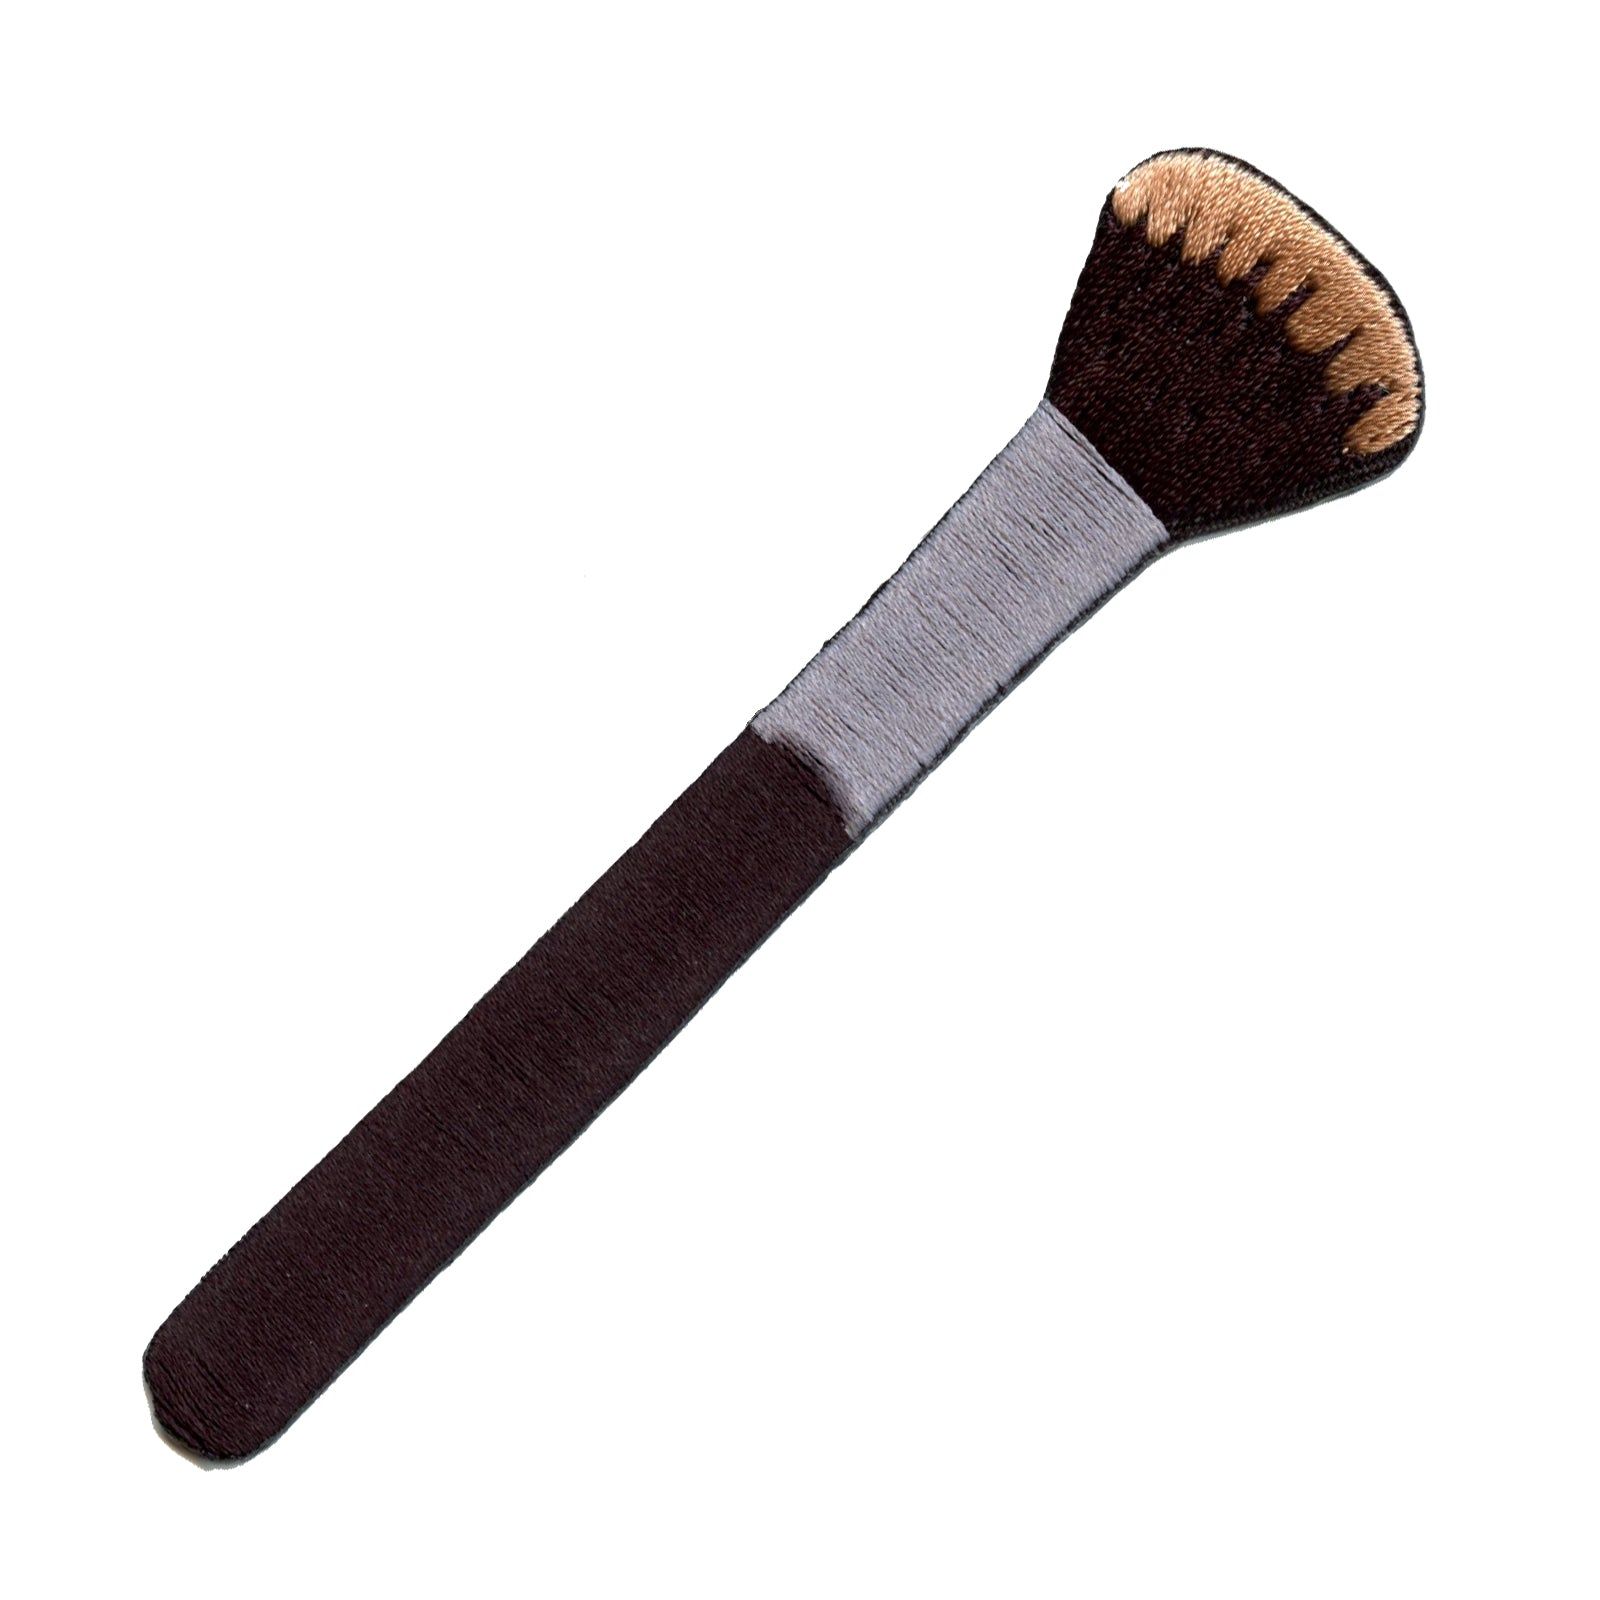 Makeup Brush Embroidered Iron On Patch 